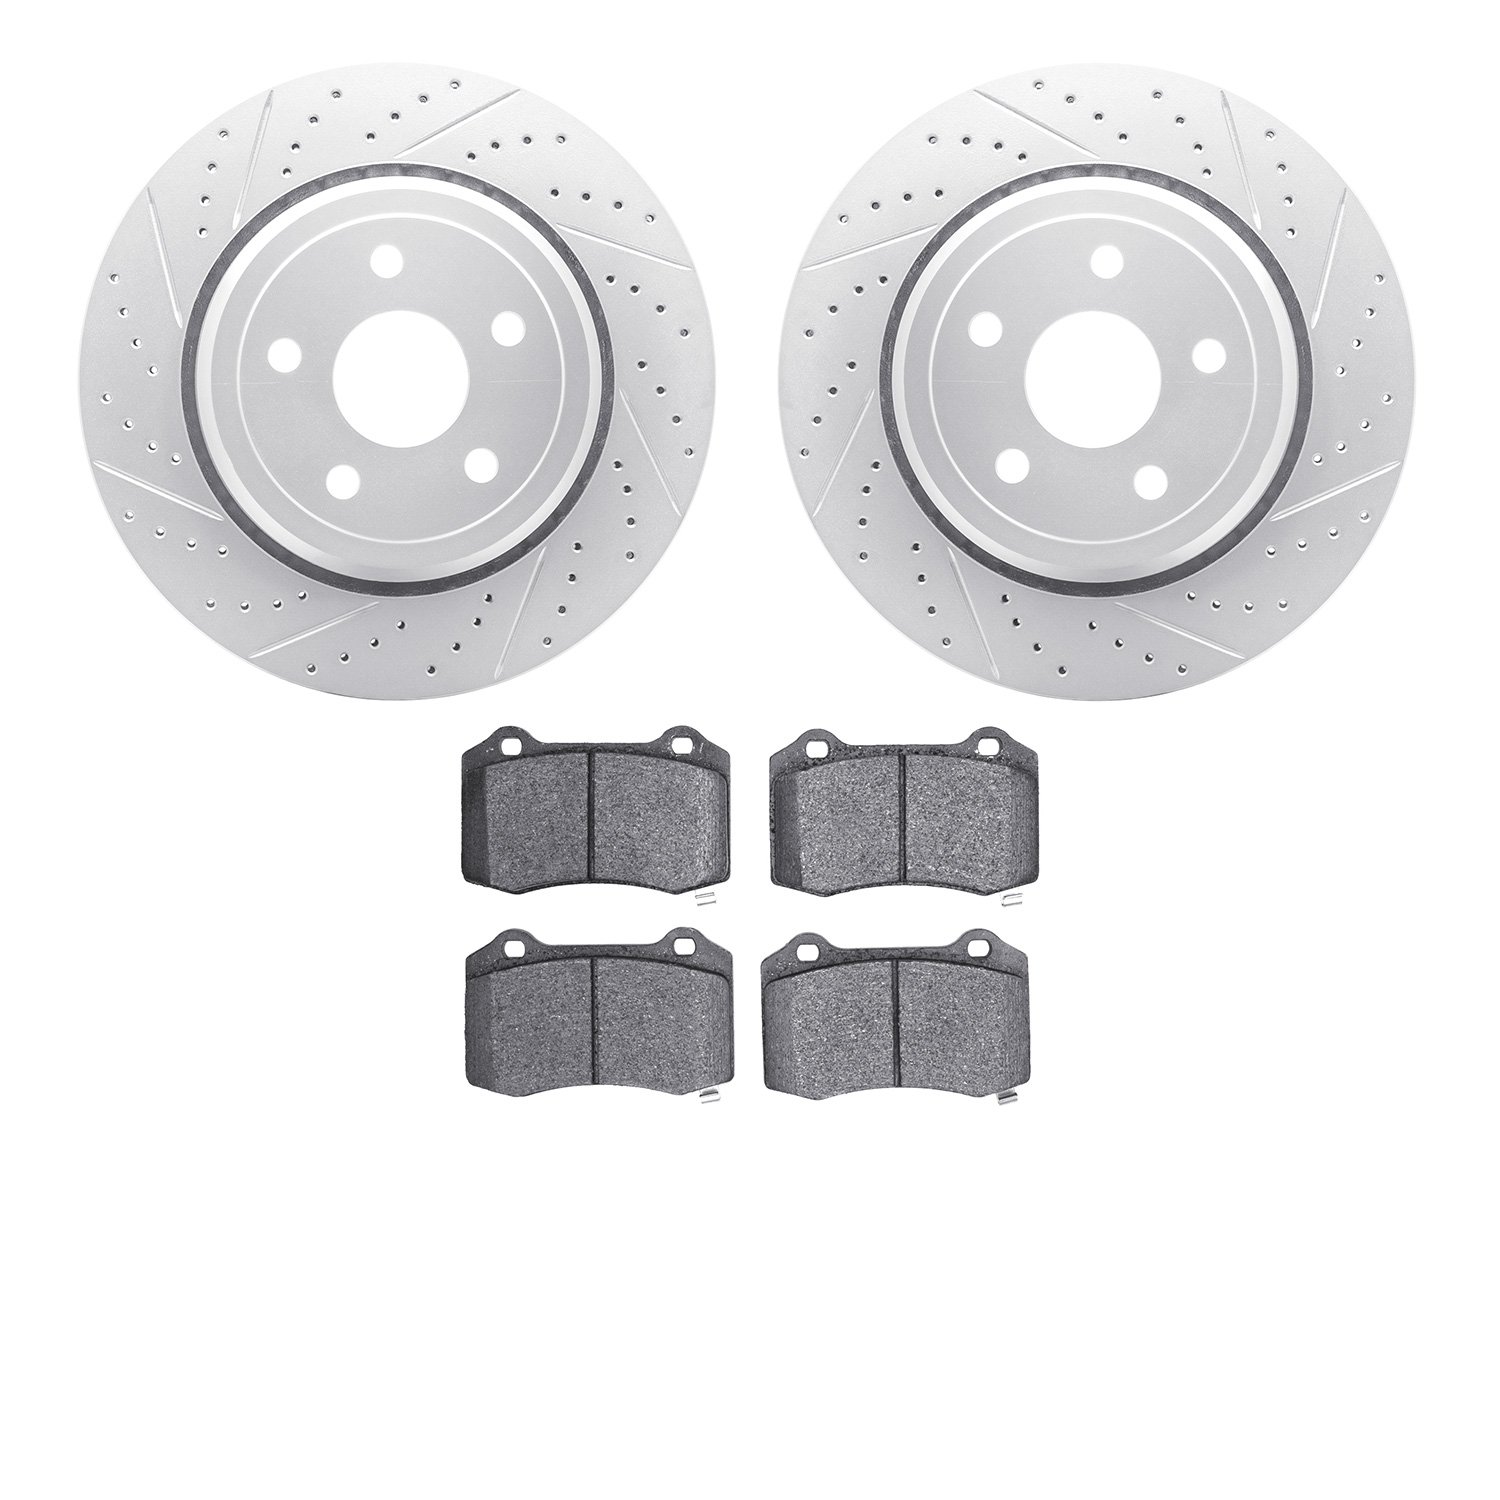 2502-42008 Geoperformance Drilled/Slotted Rotors w/5000 Advanced Brake Pads Kit, Fits Select Mopar, Position: Rear